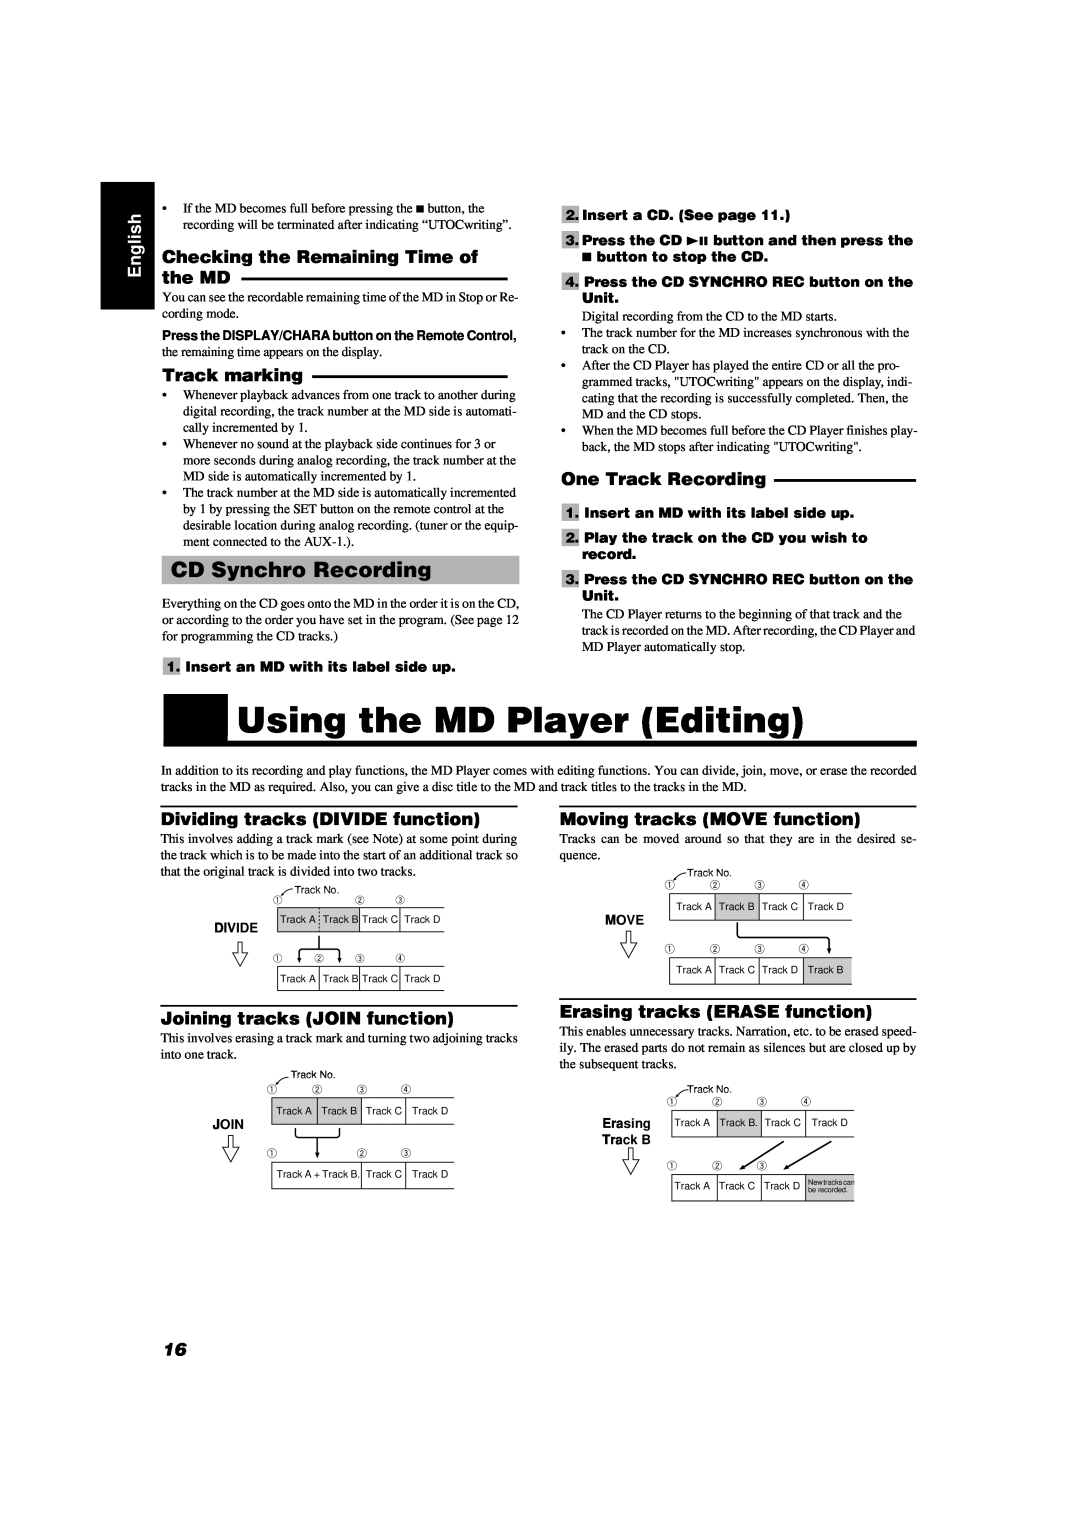 JVC UX-MD9000R manual Using the MD Player Editing, CD Synchro Recording, Track marking, One Track Recording, English 